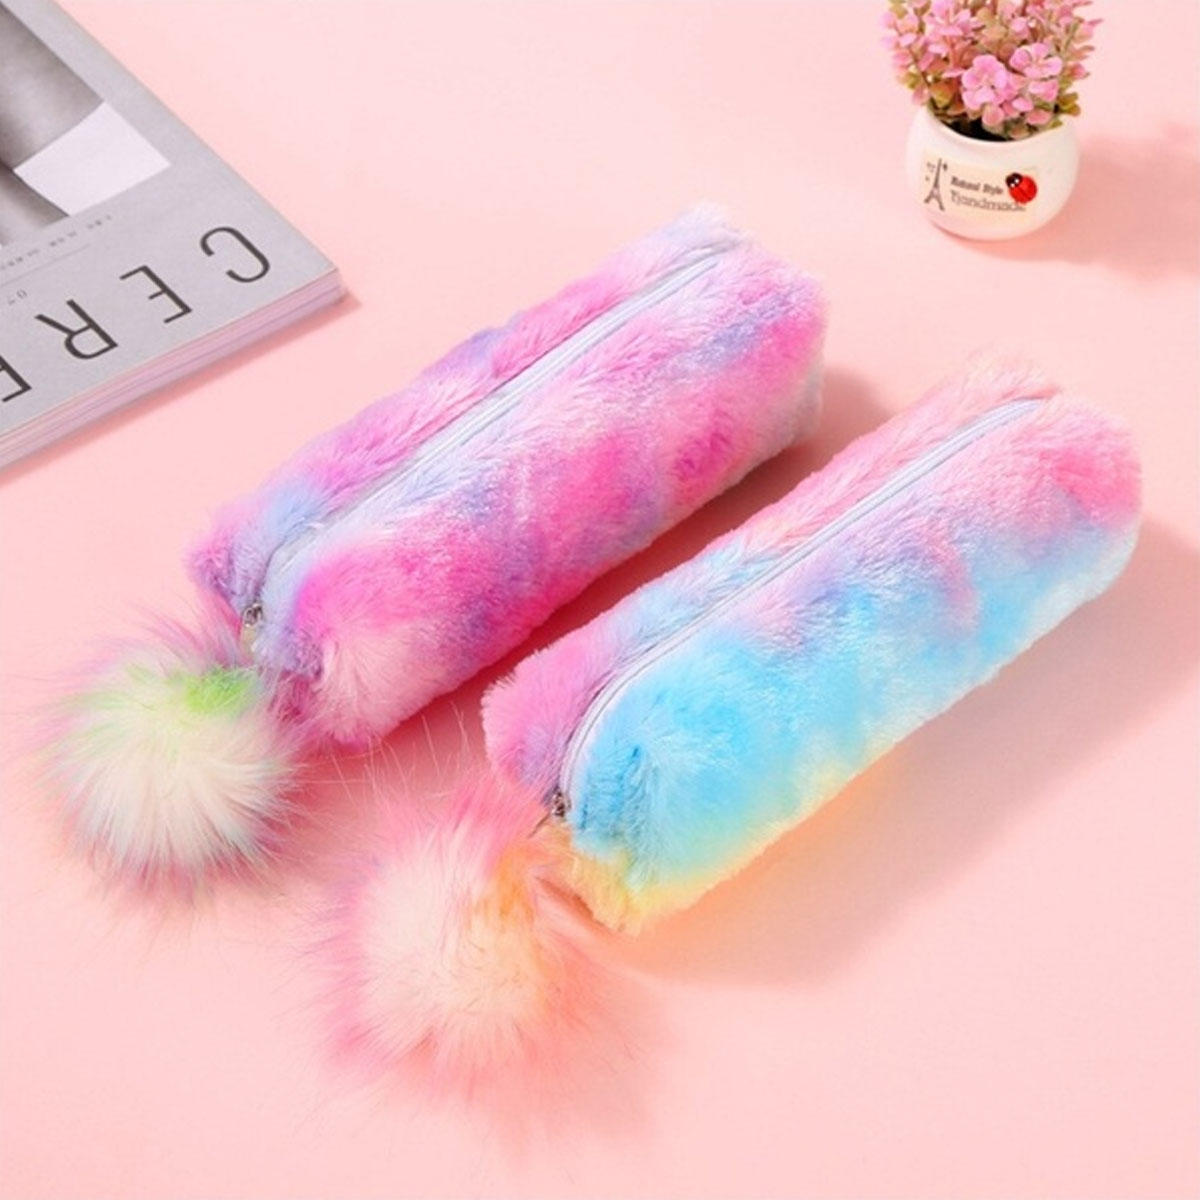 Pencil case Furry quality stationery back to school gift fluffy case FREE pen